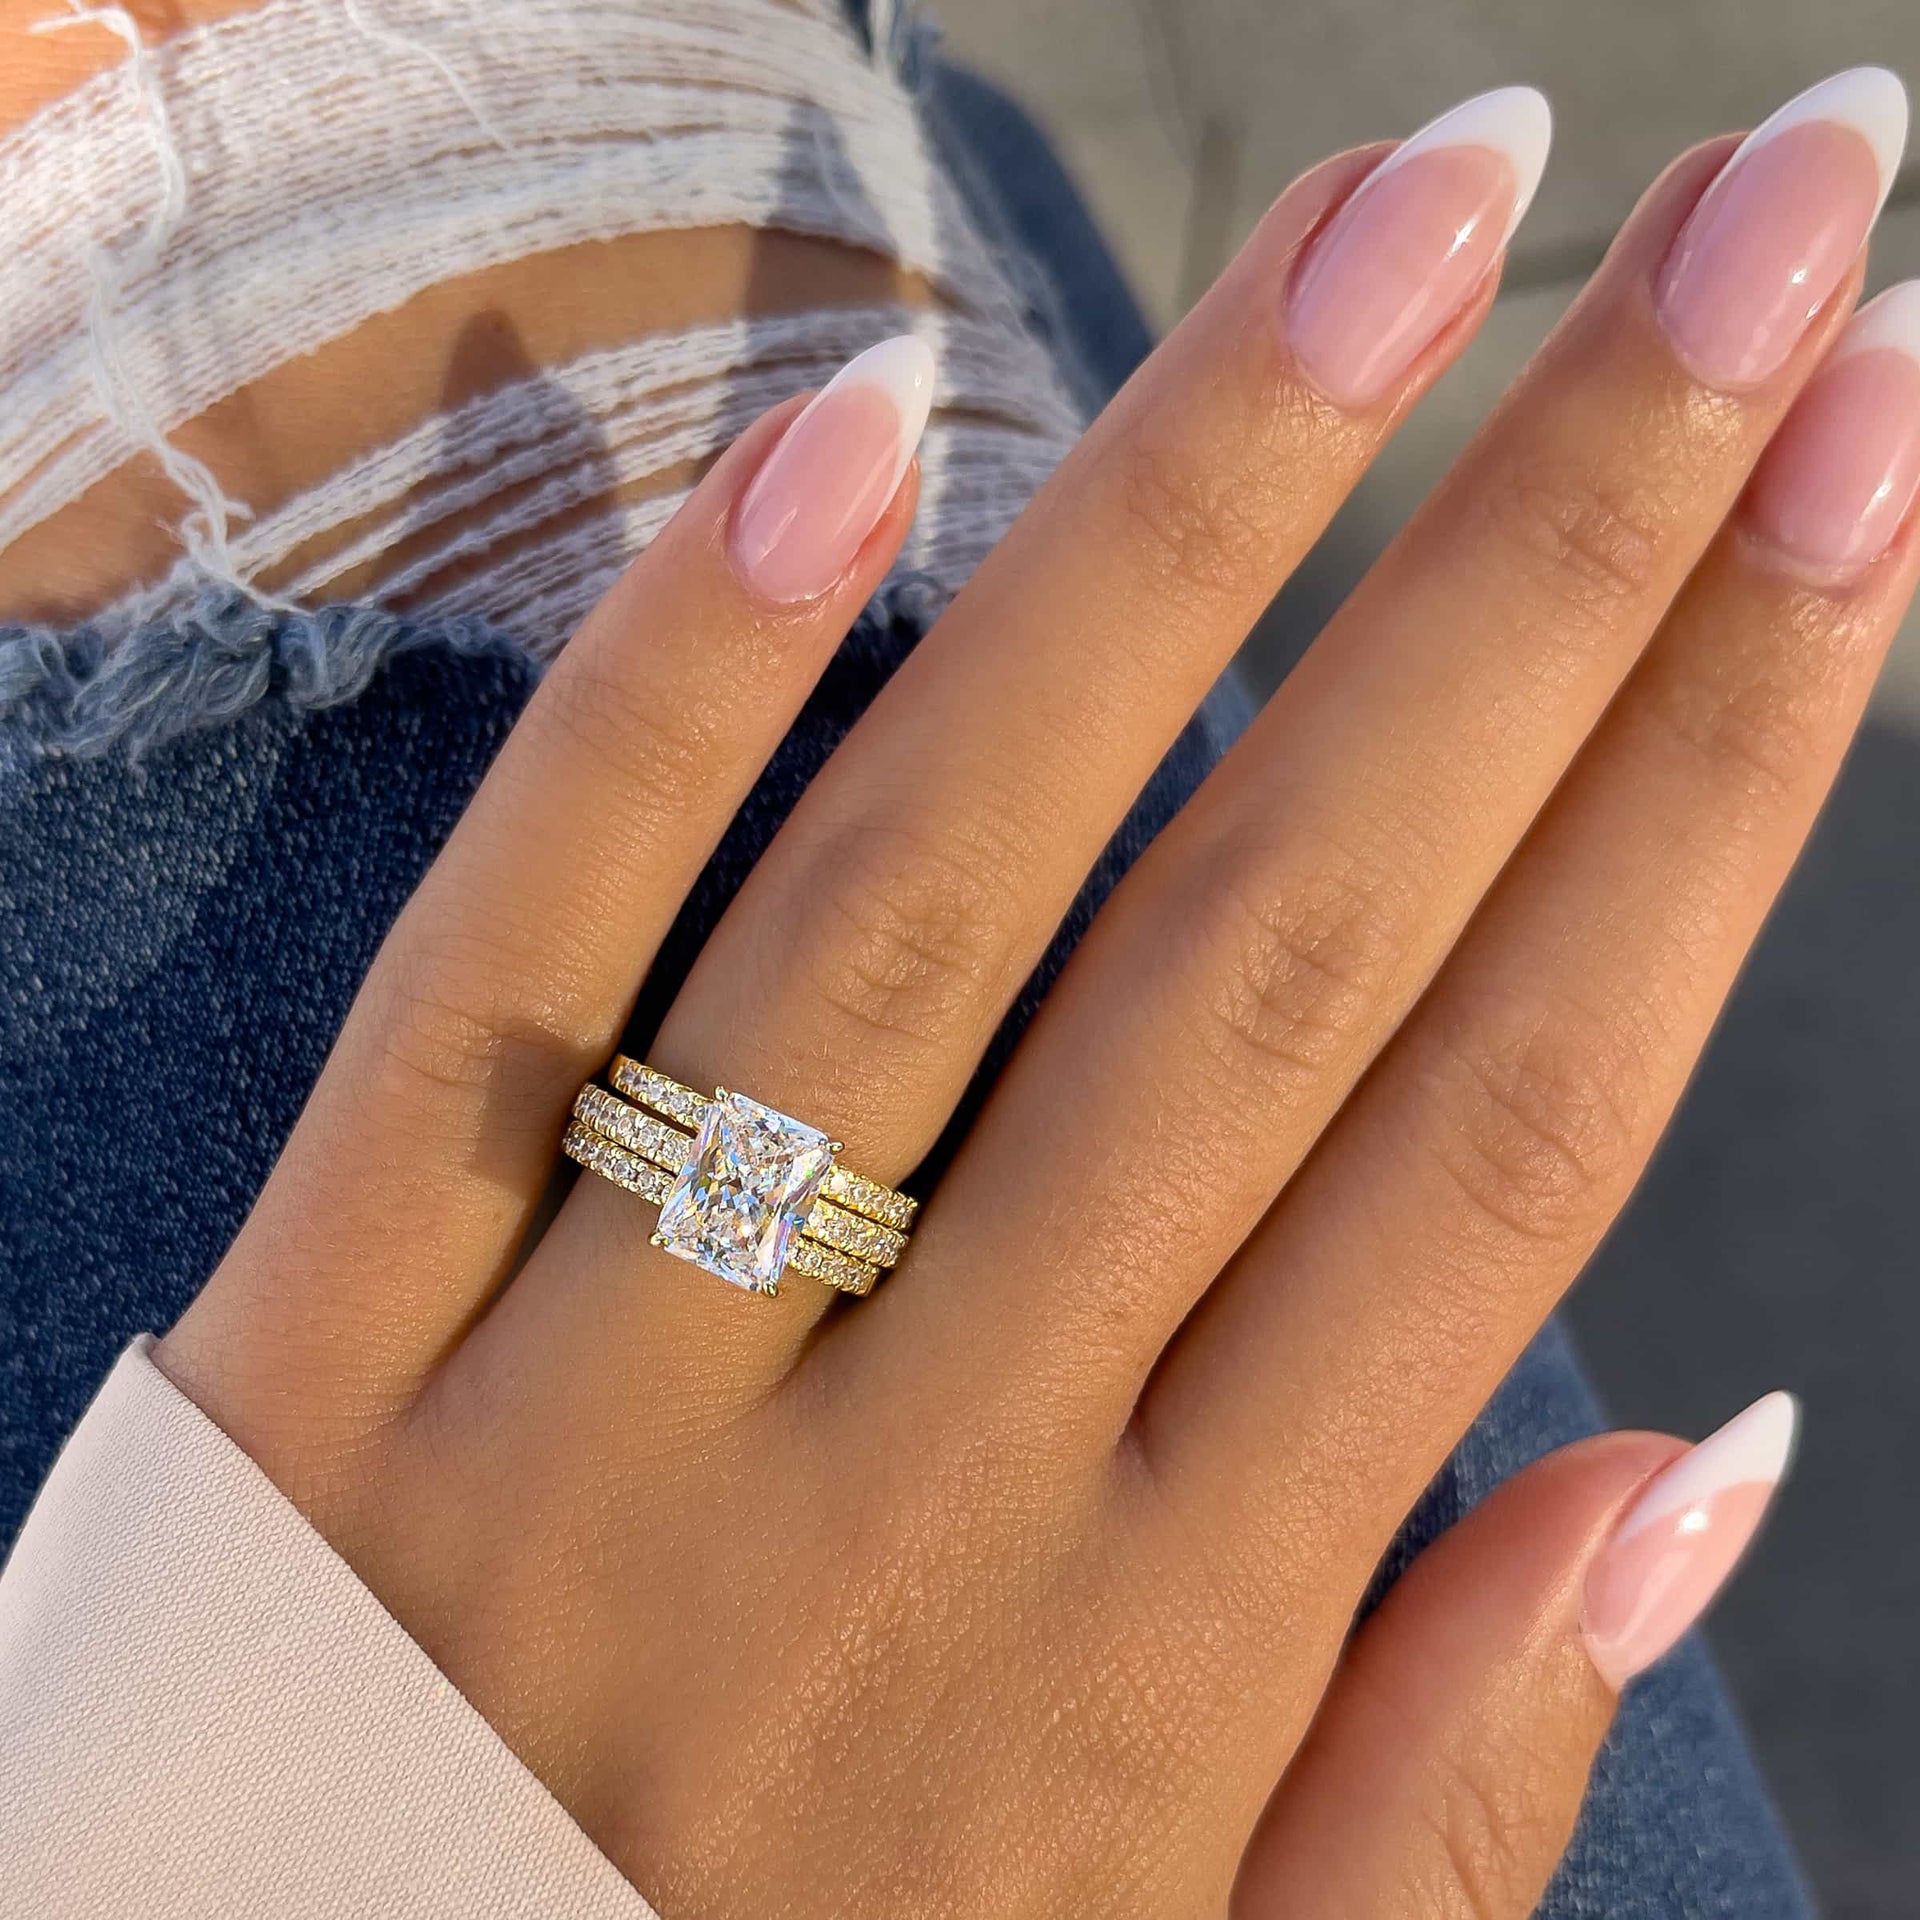 woman wearing two gold wedding bands and radiant cut engagement ring